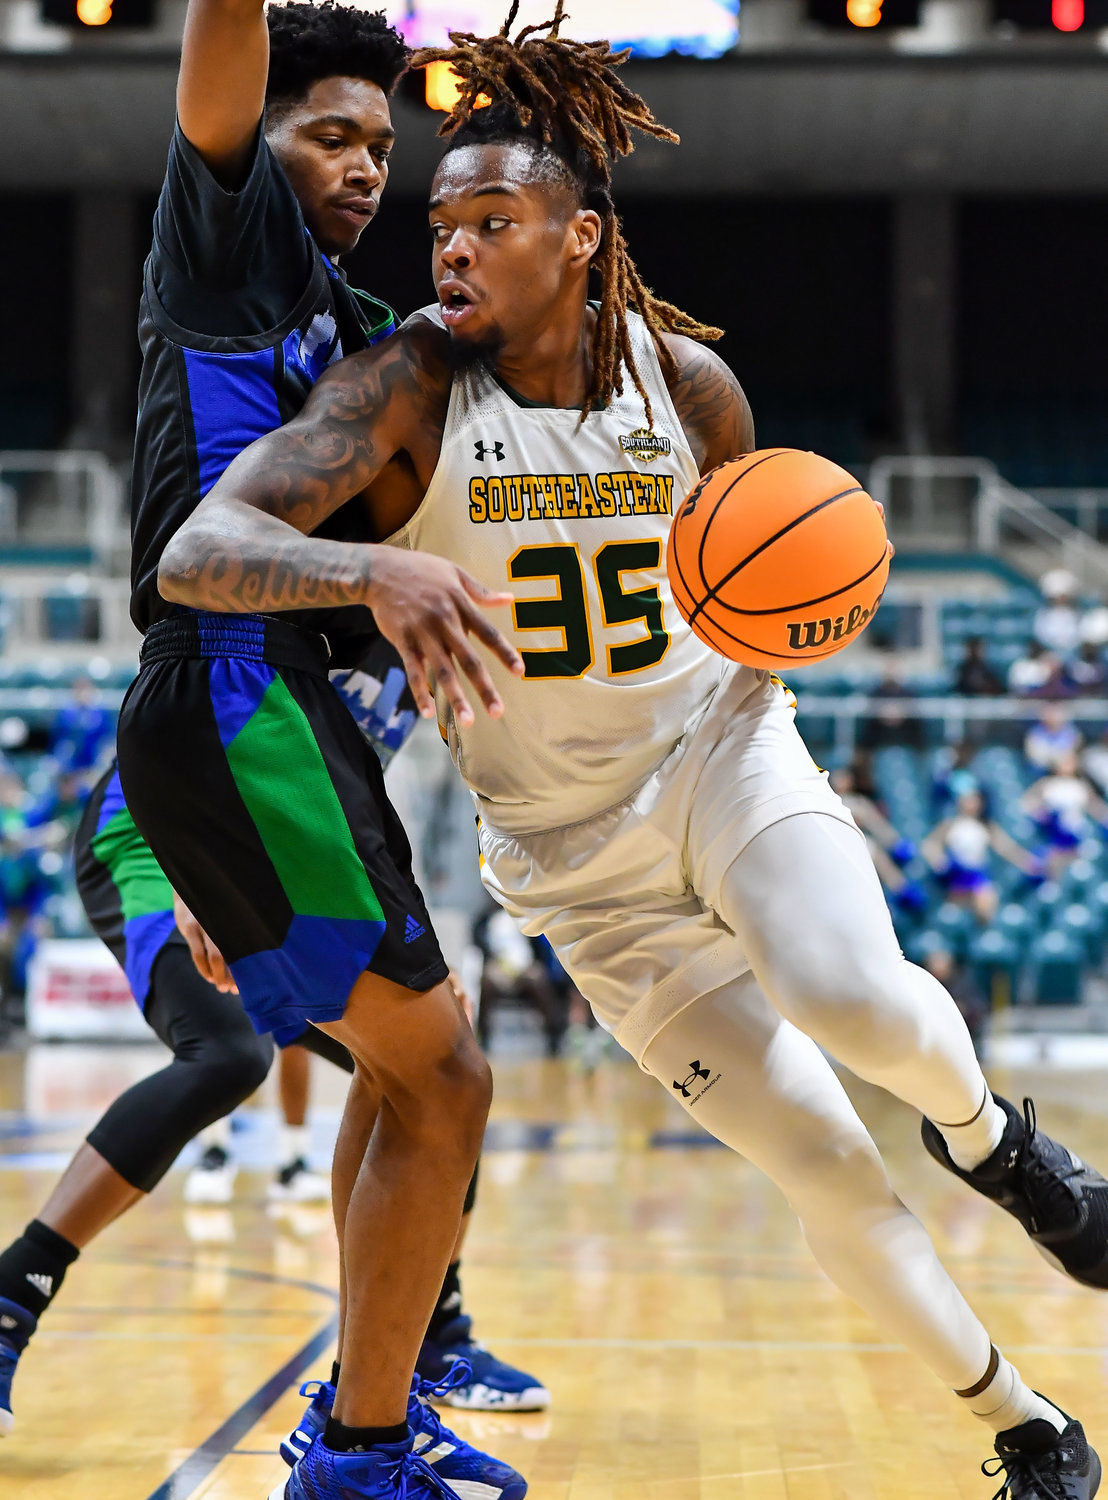 March 12,, 2022:  Southeastern Louisianas Gus Okafor #35 drives to the basket during the Southland Conference Basketball Championship game between A&M Corpus Christi vs Southeastern Louisiana. (Photo by Mark Goodman / Katy Times)